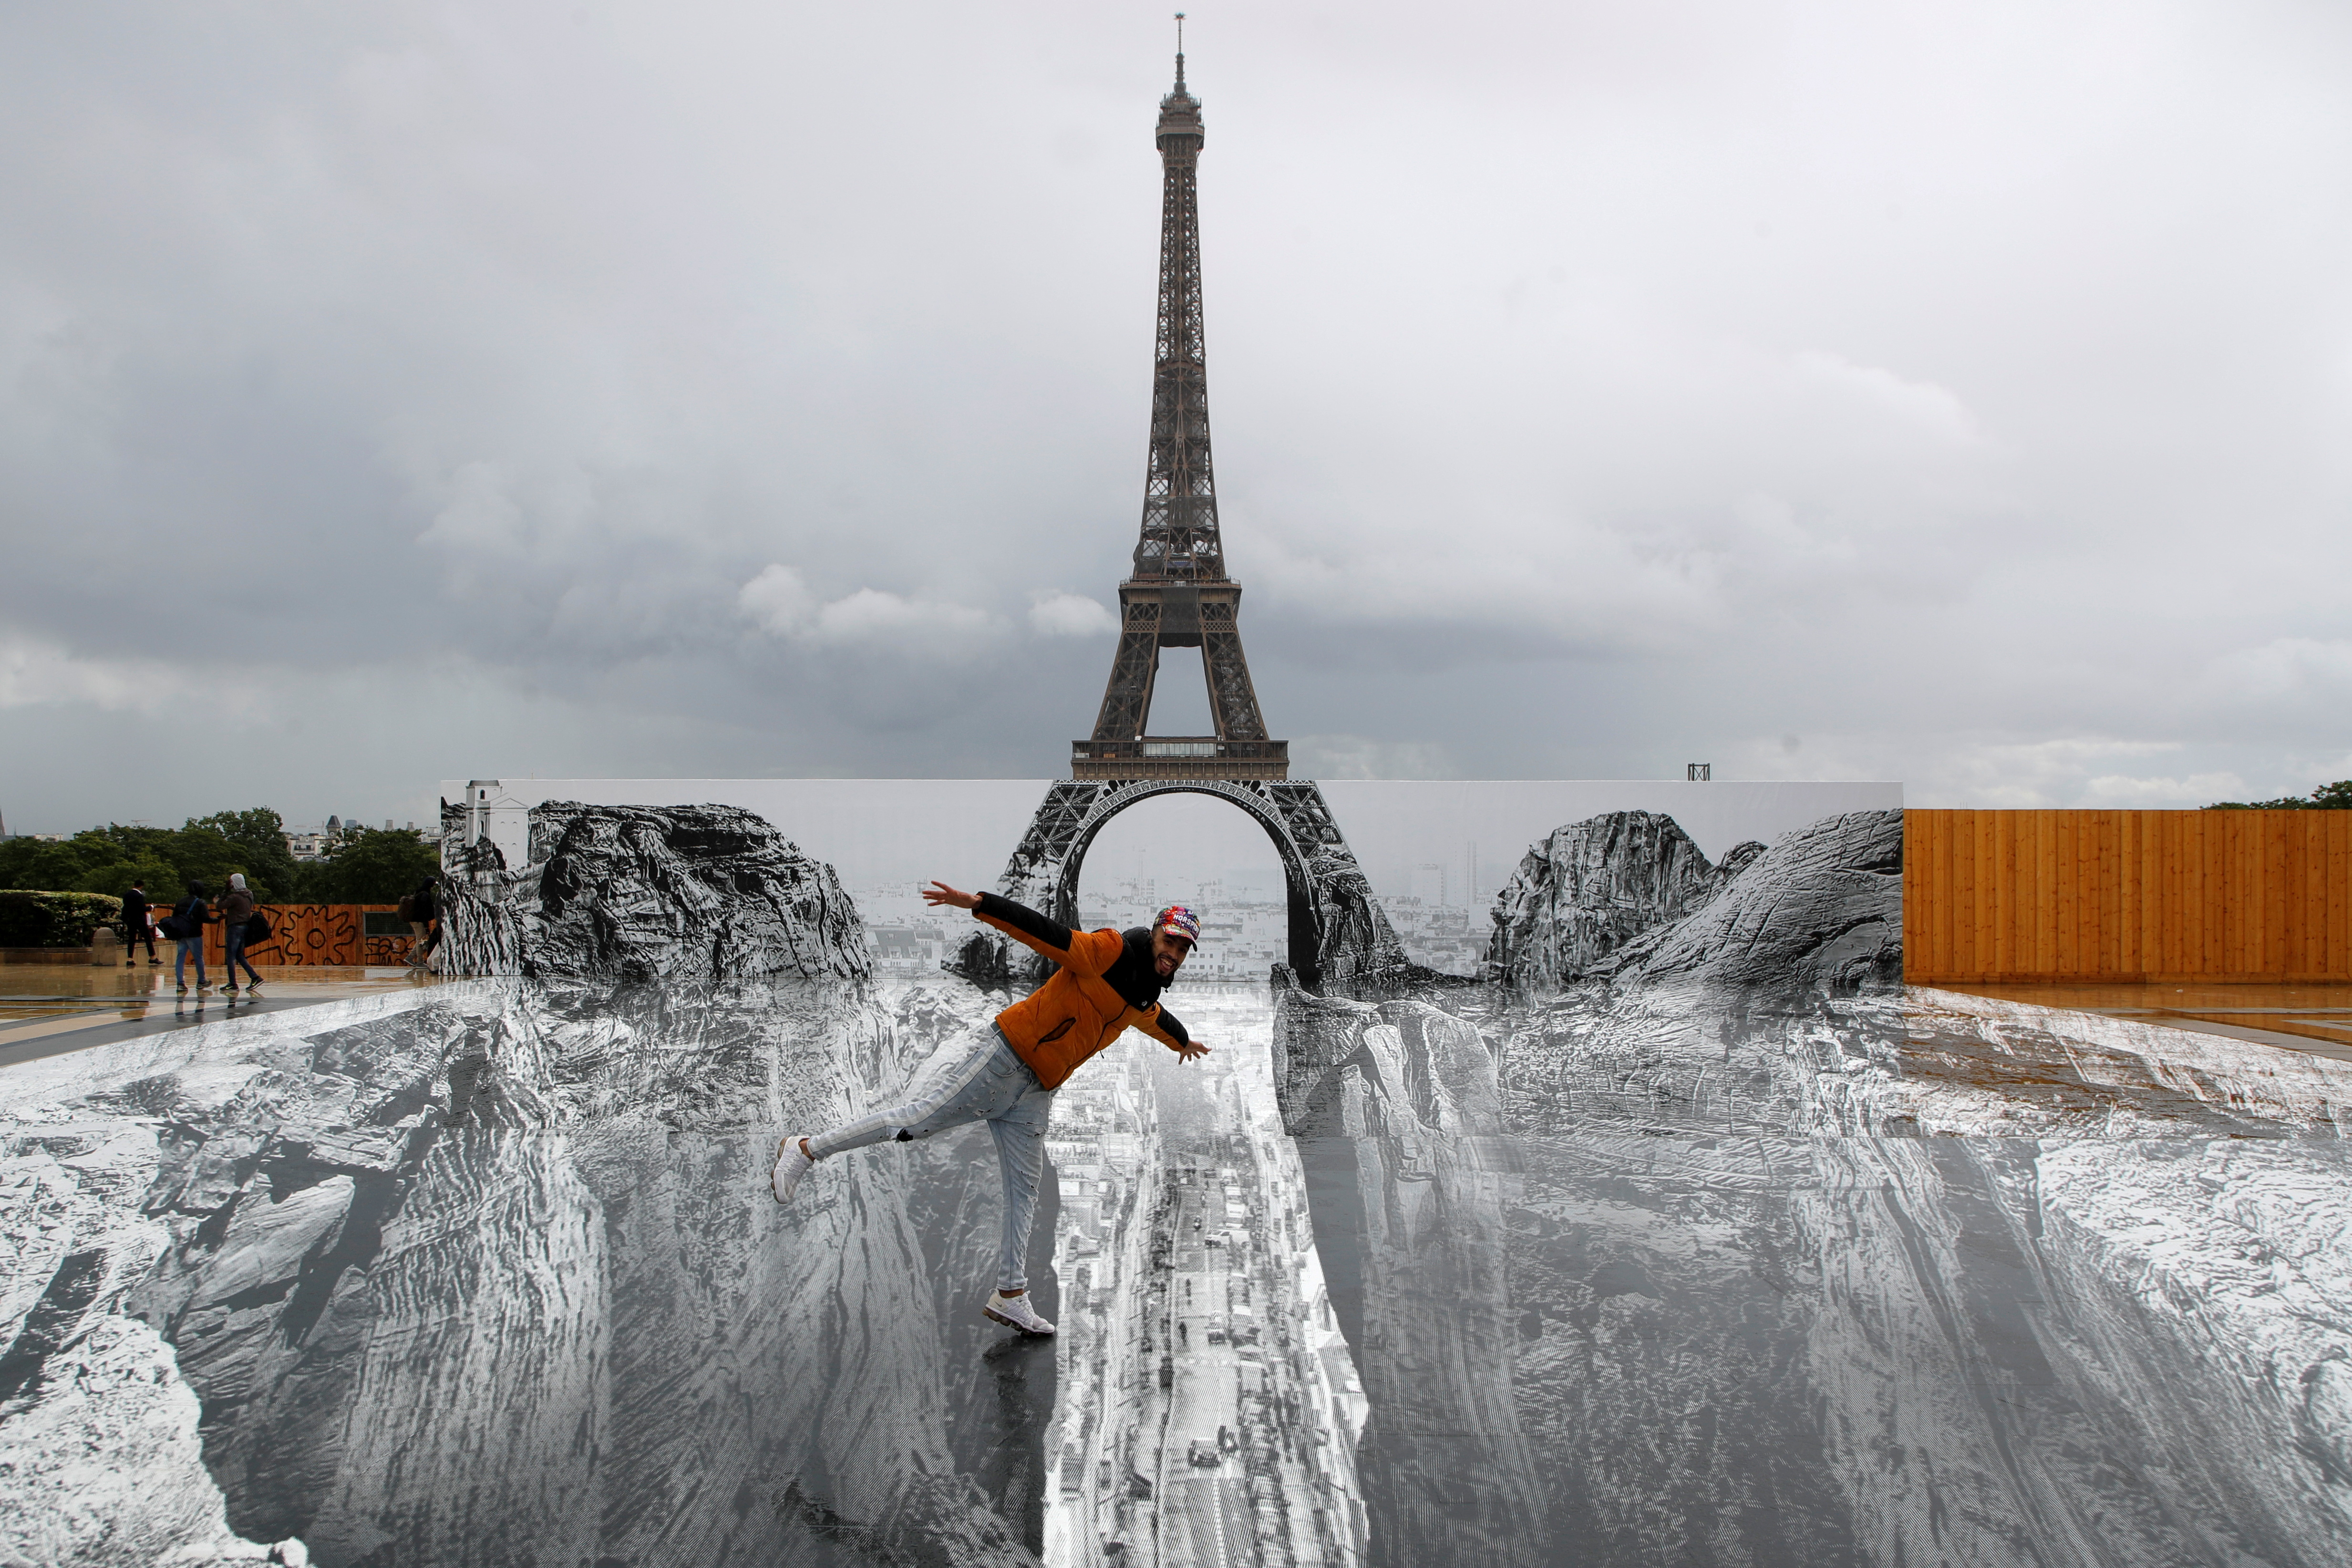 A giant artwork by French artist JR installed in front of the Eiffel Tower in Paris